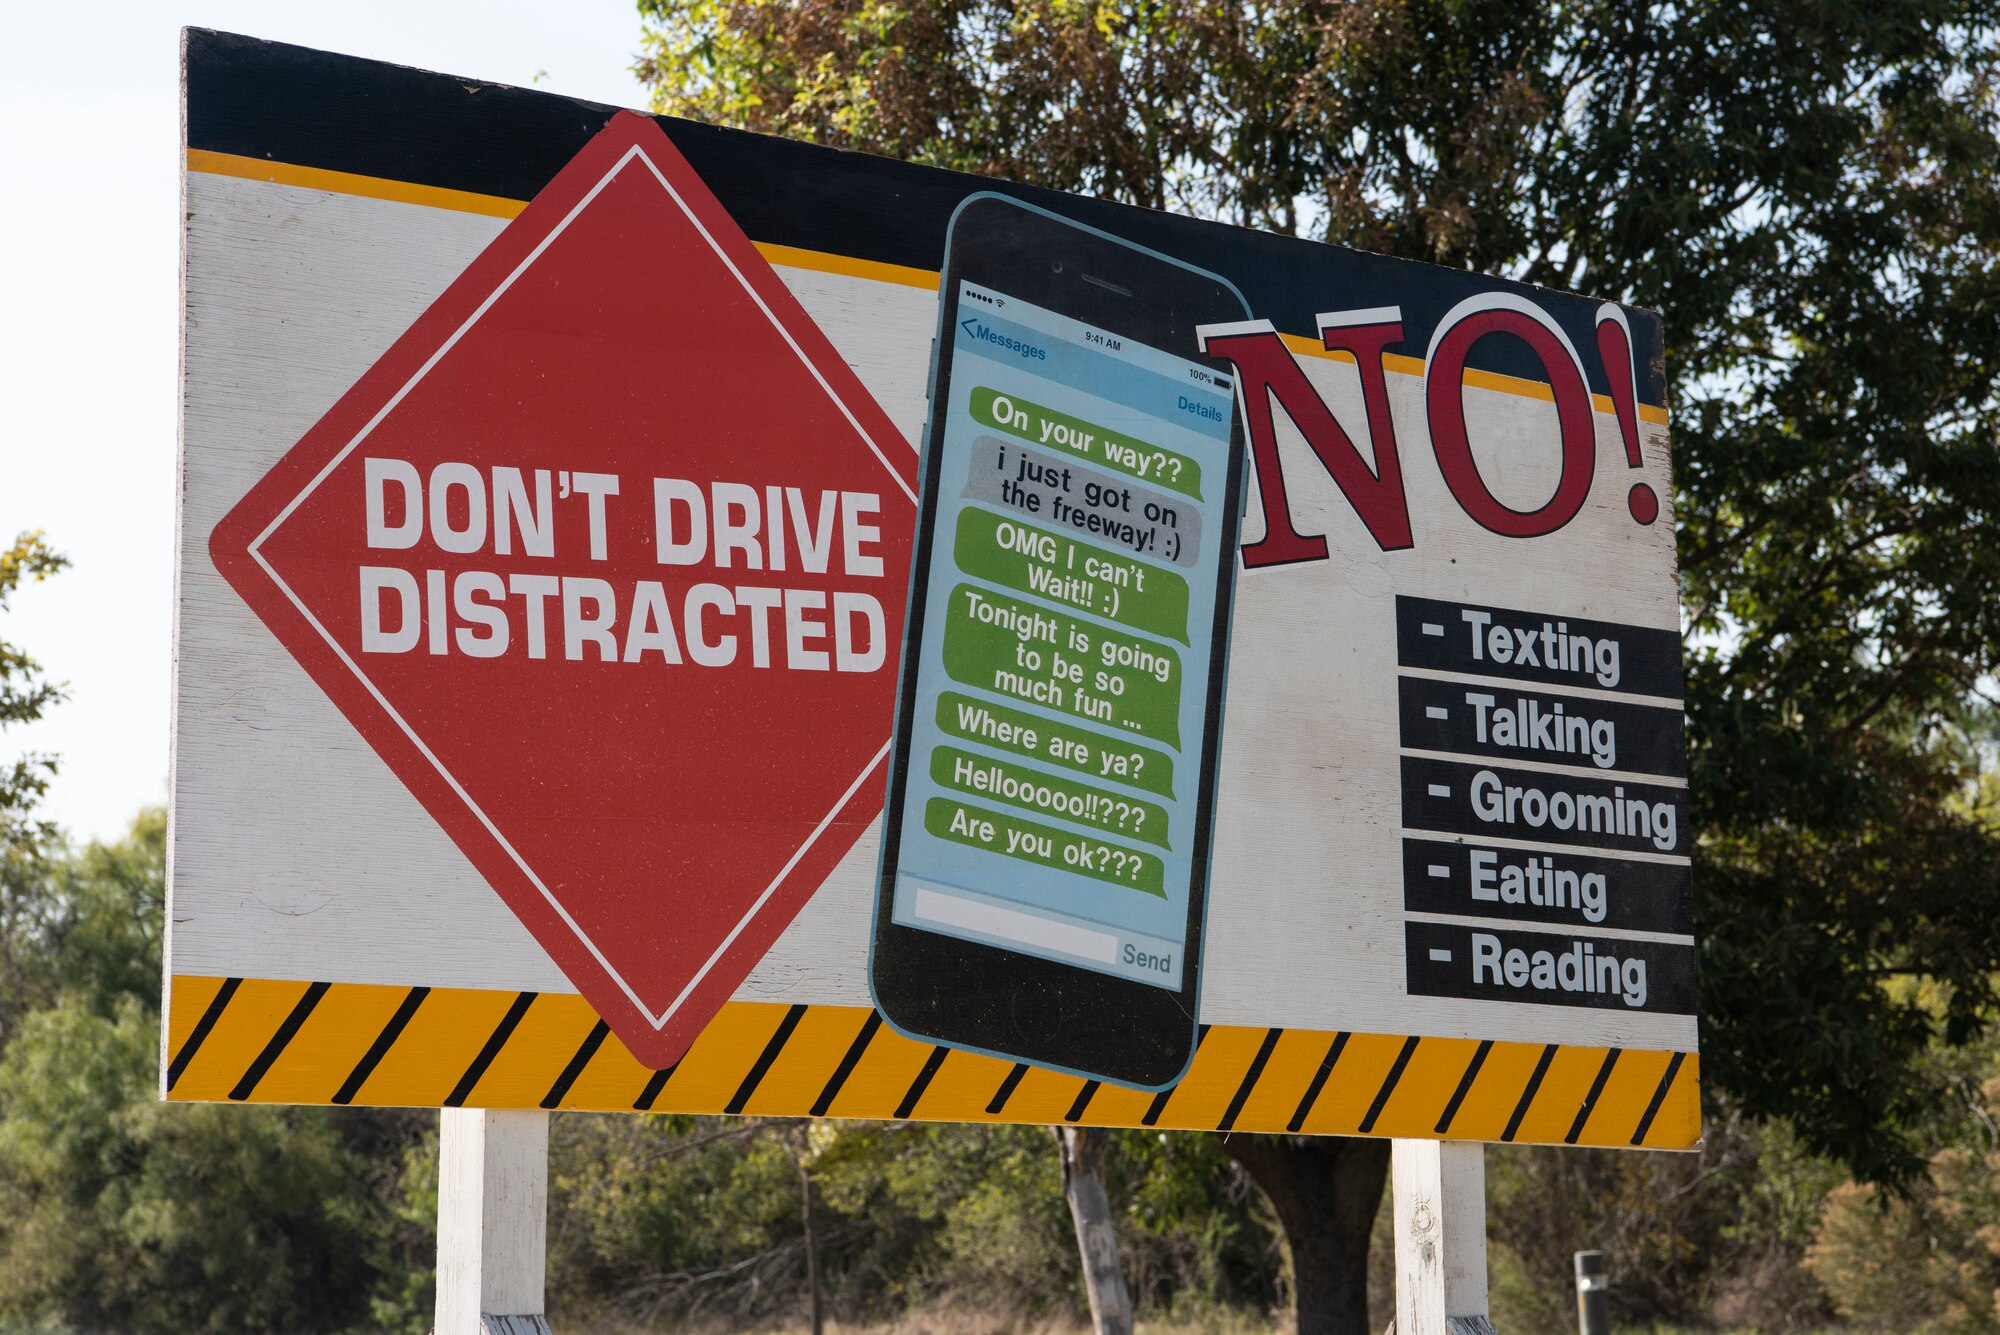 A sign stands to remind base personnel and their families to put away phones while driving and focus their full attention on the road while driving at Laughlin Air Force Base, Texas, Oct. 14, 2020. “Although everyone is at risk, whether you’re the distracted driver or you get hit by the distracted driver, the youth are the most at-risk demographic,” said Alexander Valdez, 47th Flying Training Wing Occupational Safety Specialist. “But we are all responsible for putting our phones down for a couple of minutes while we drive.” (U.S. Air Force photo by Senior Airman Marco A. Gomez)